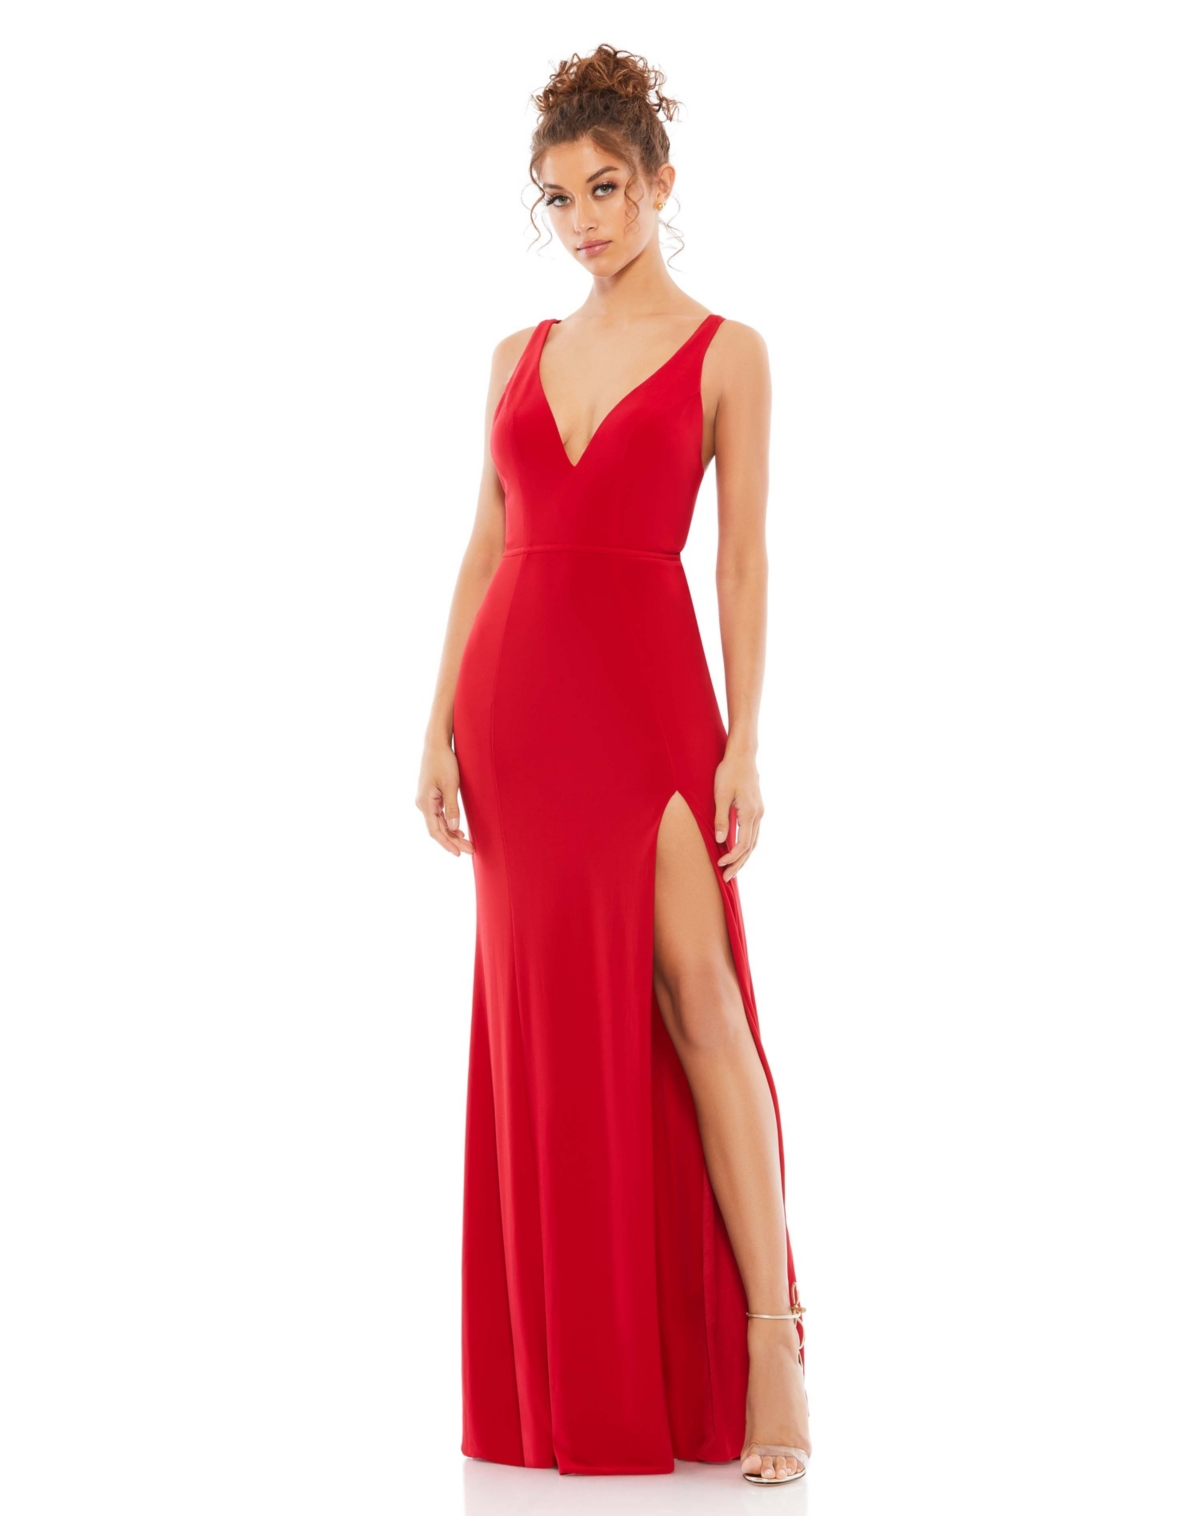 Mac Duggal Embellished Tulle One Shoulder Sleeveless Thigh High